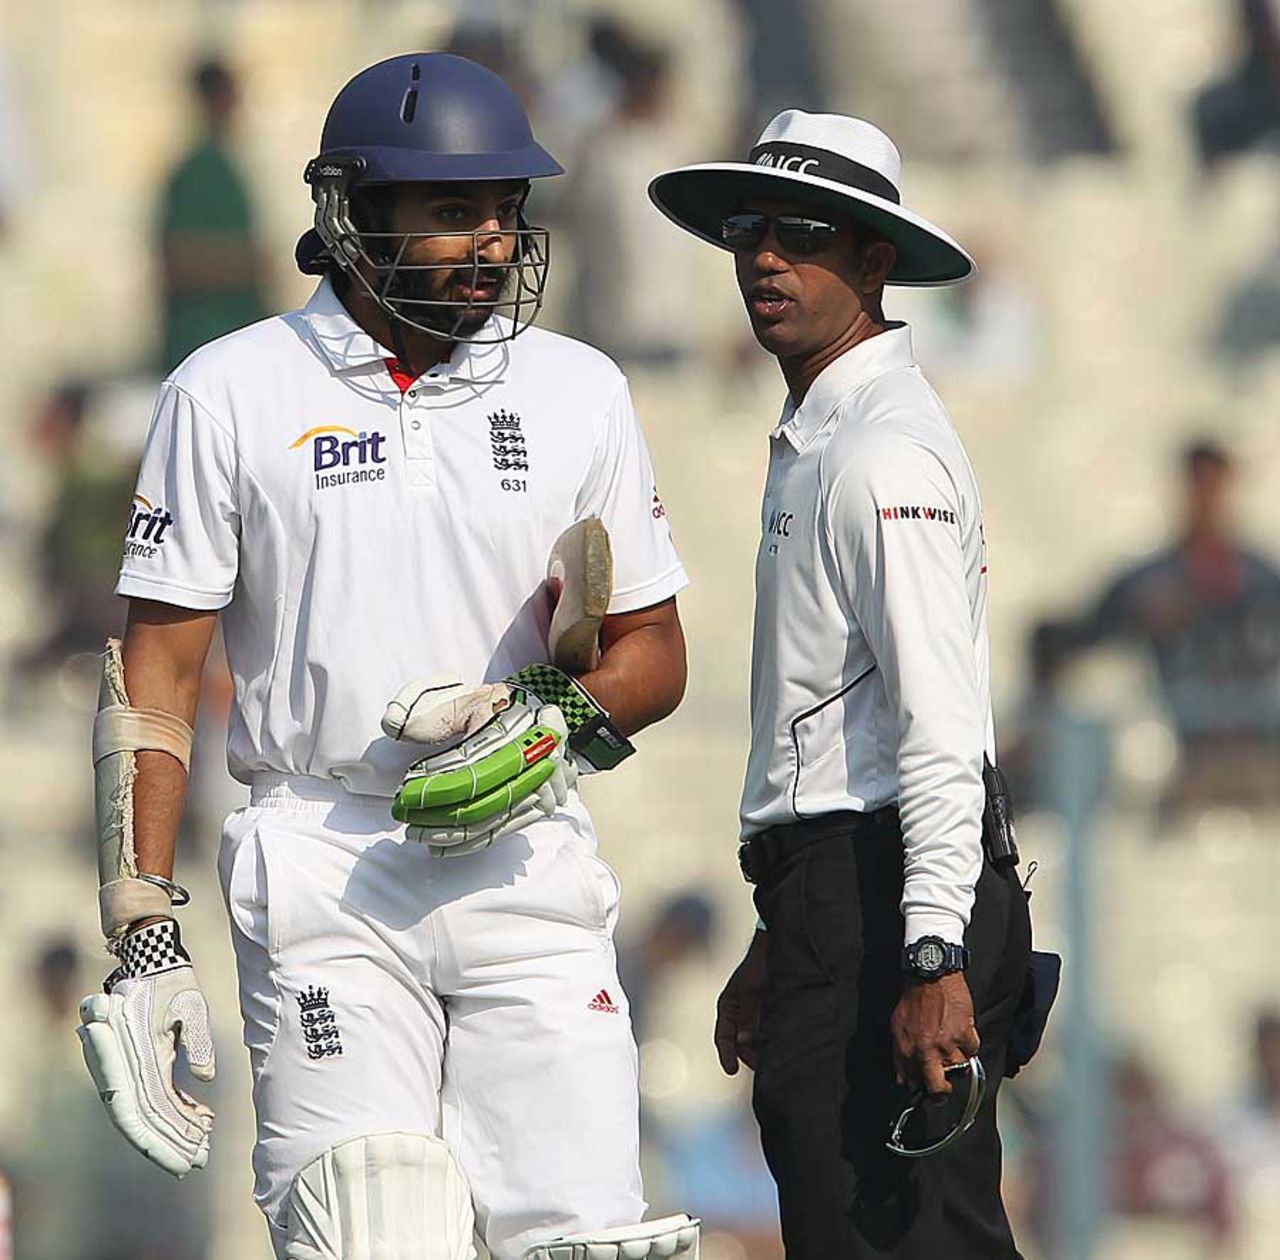 Monty Panesar was not happy after being given out lbw, India v England, 3rd Test, Kolkata, 4th day, December 8, 2012